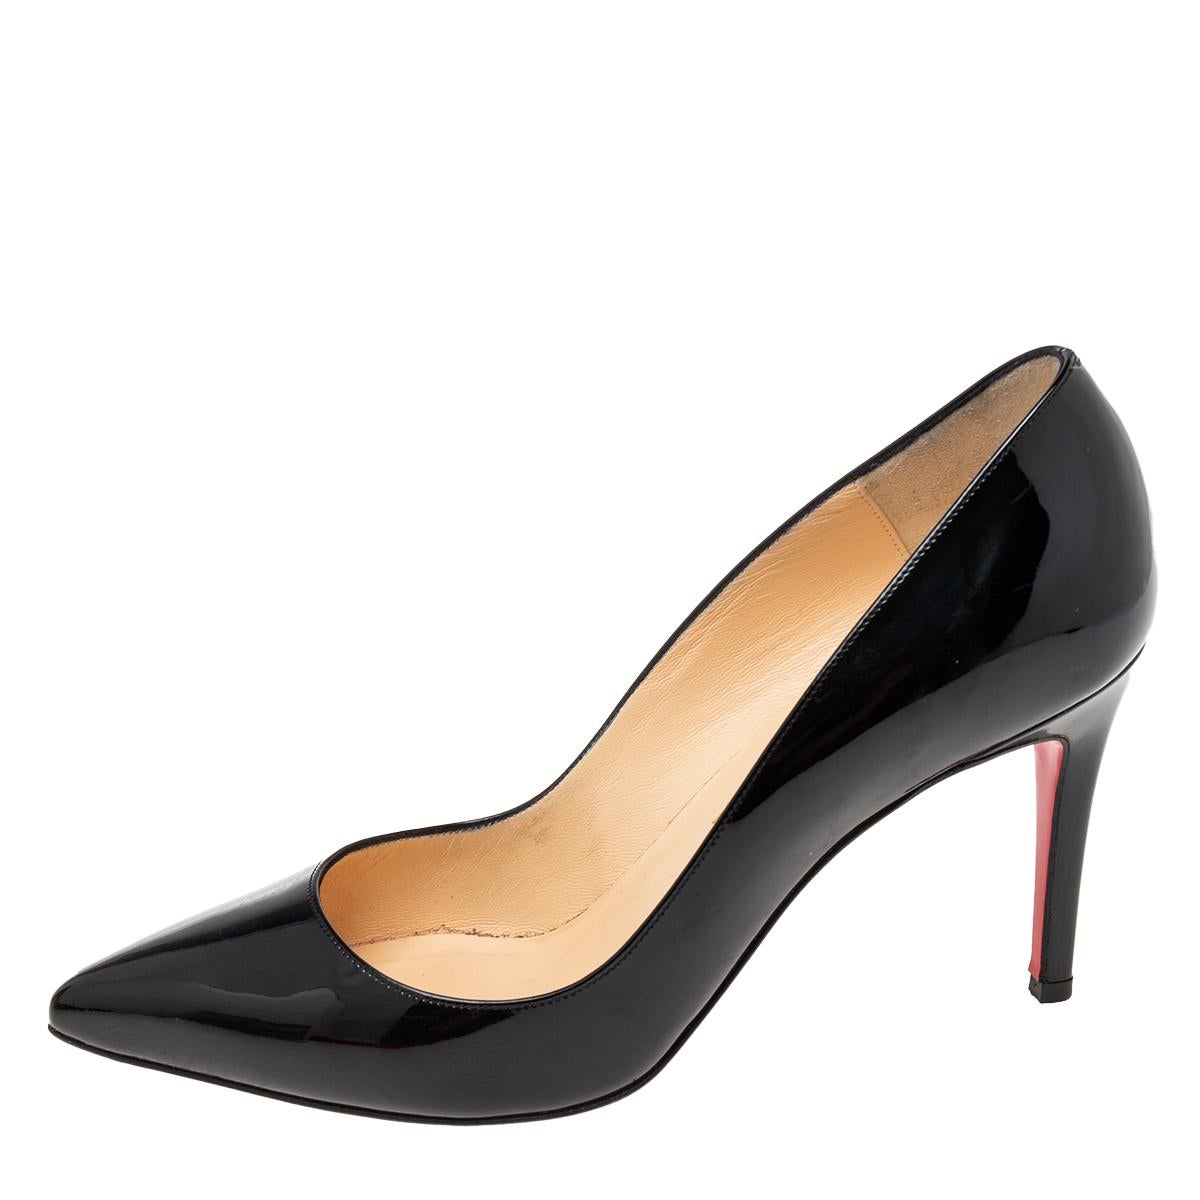 These Kate pumps from Christian Louboutin are iconic and brilliantly created. They were designed with selective features that inherited the brand's signature skill and legacy effortlessly. Made using black patent leather into a jaw-dropping